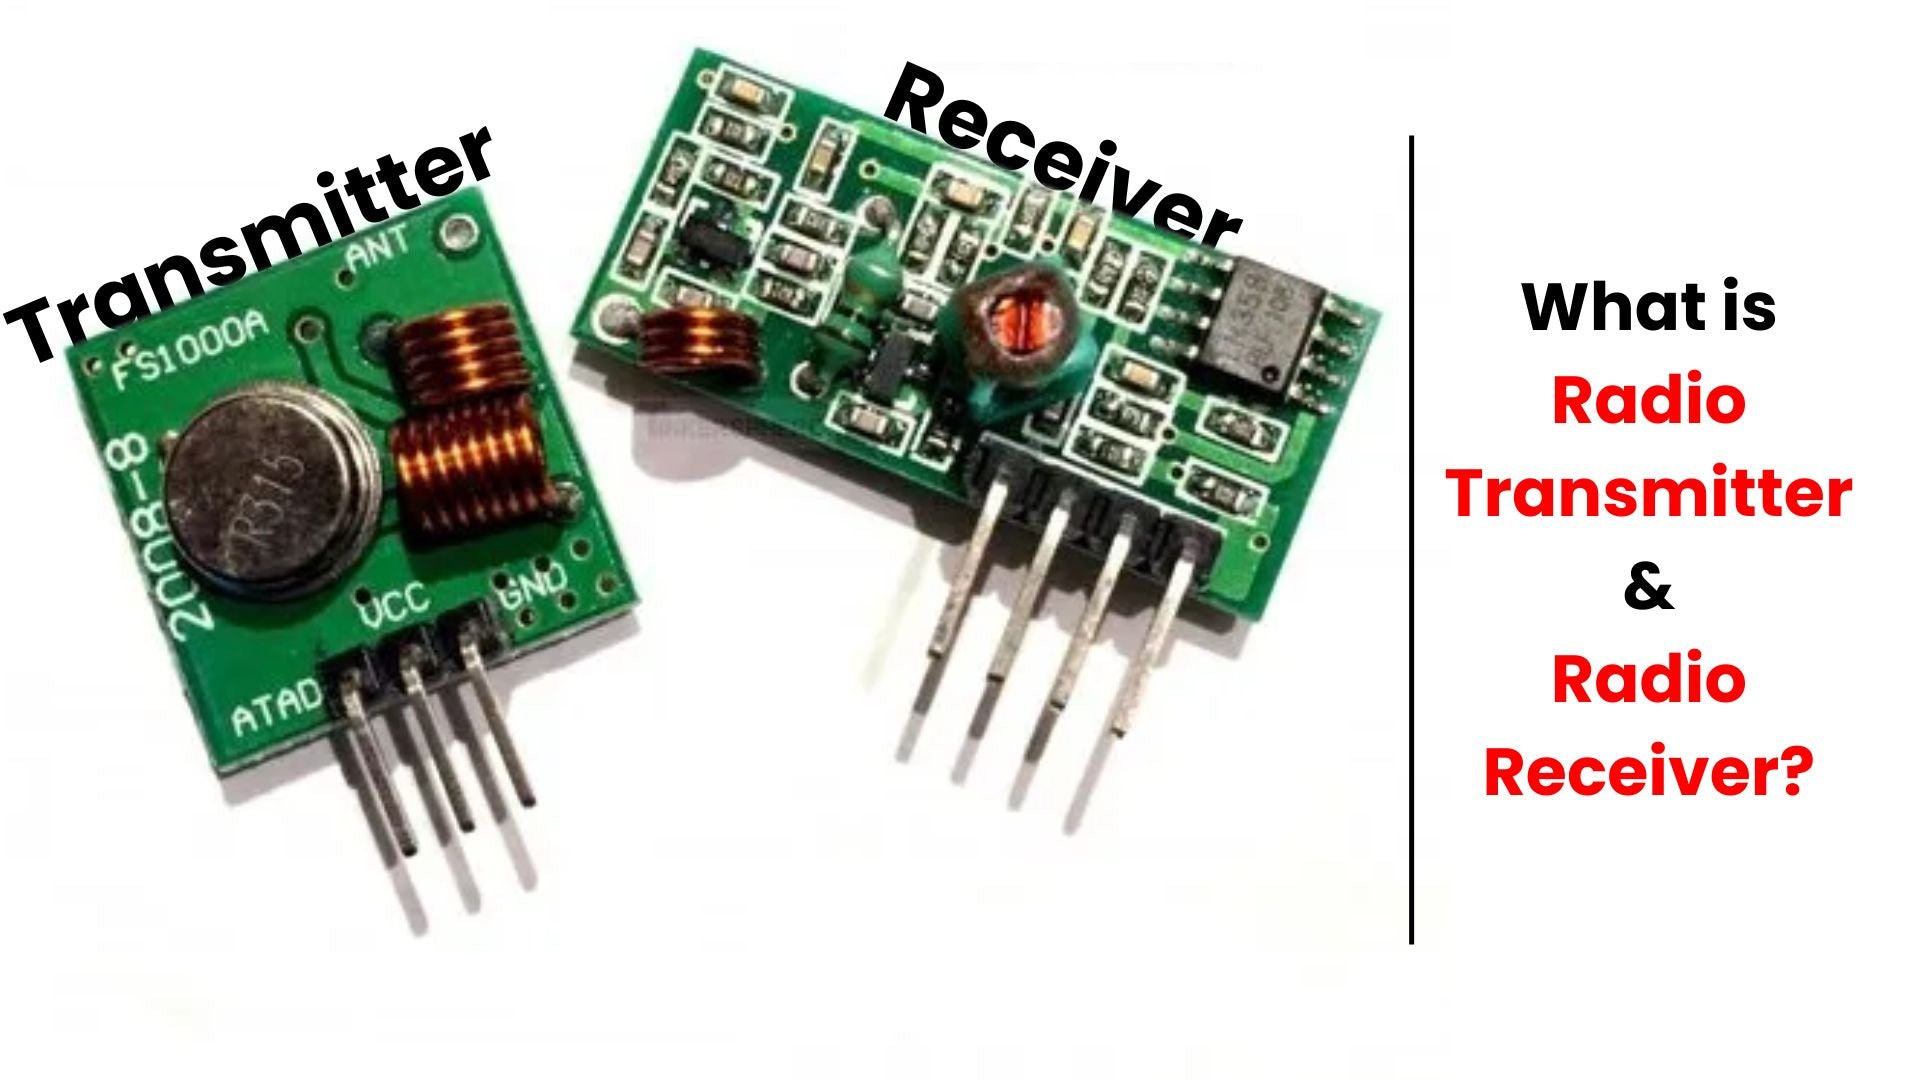 What is a Radio Transmitter and a Radio Receiver?